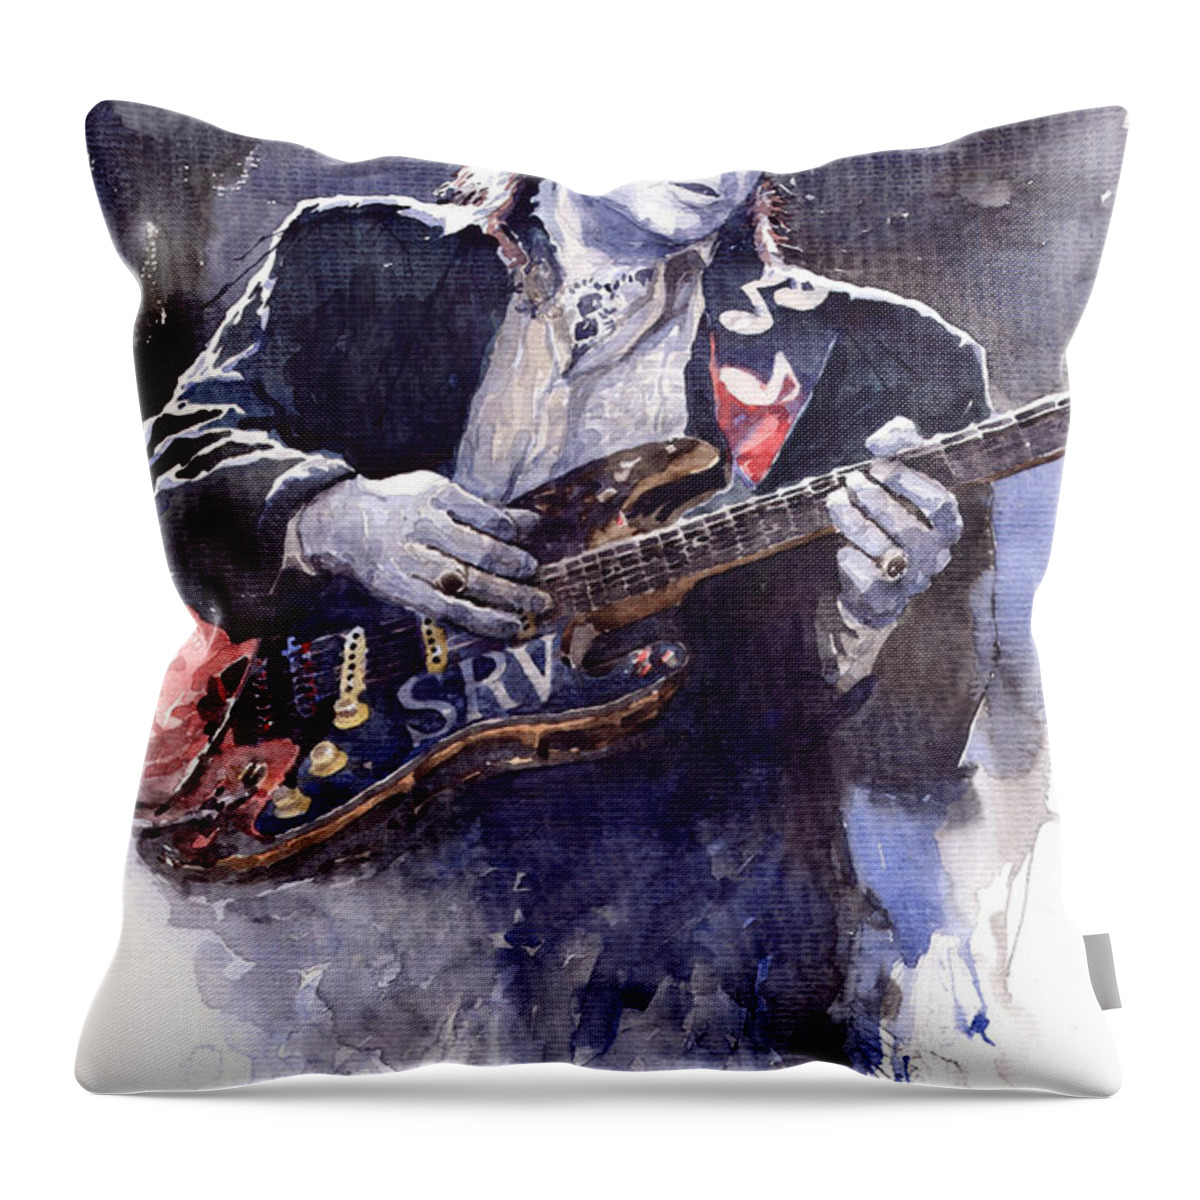 Guitarist Throw Pillow featuring the painting Stevie Ray Vaughan 1 by Yuriy Shevchuk